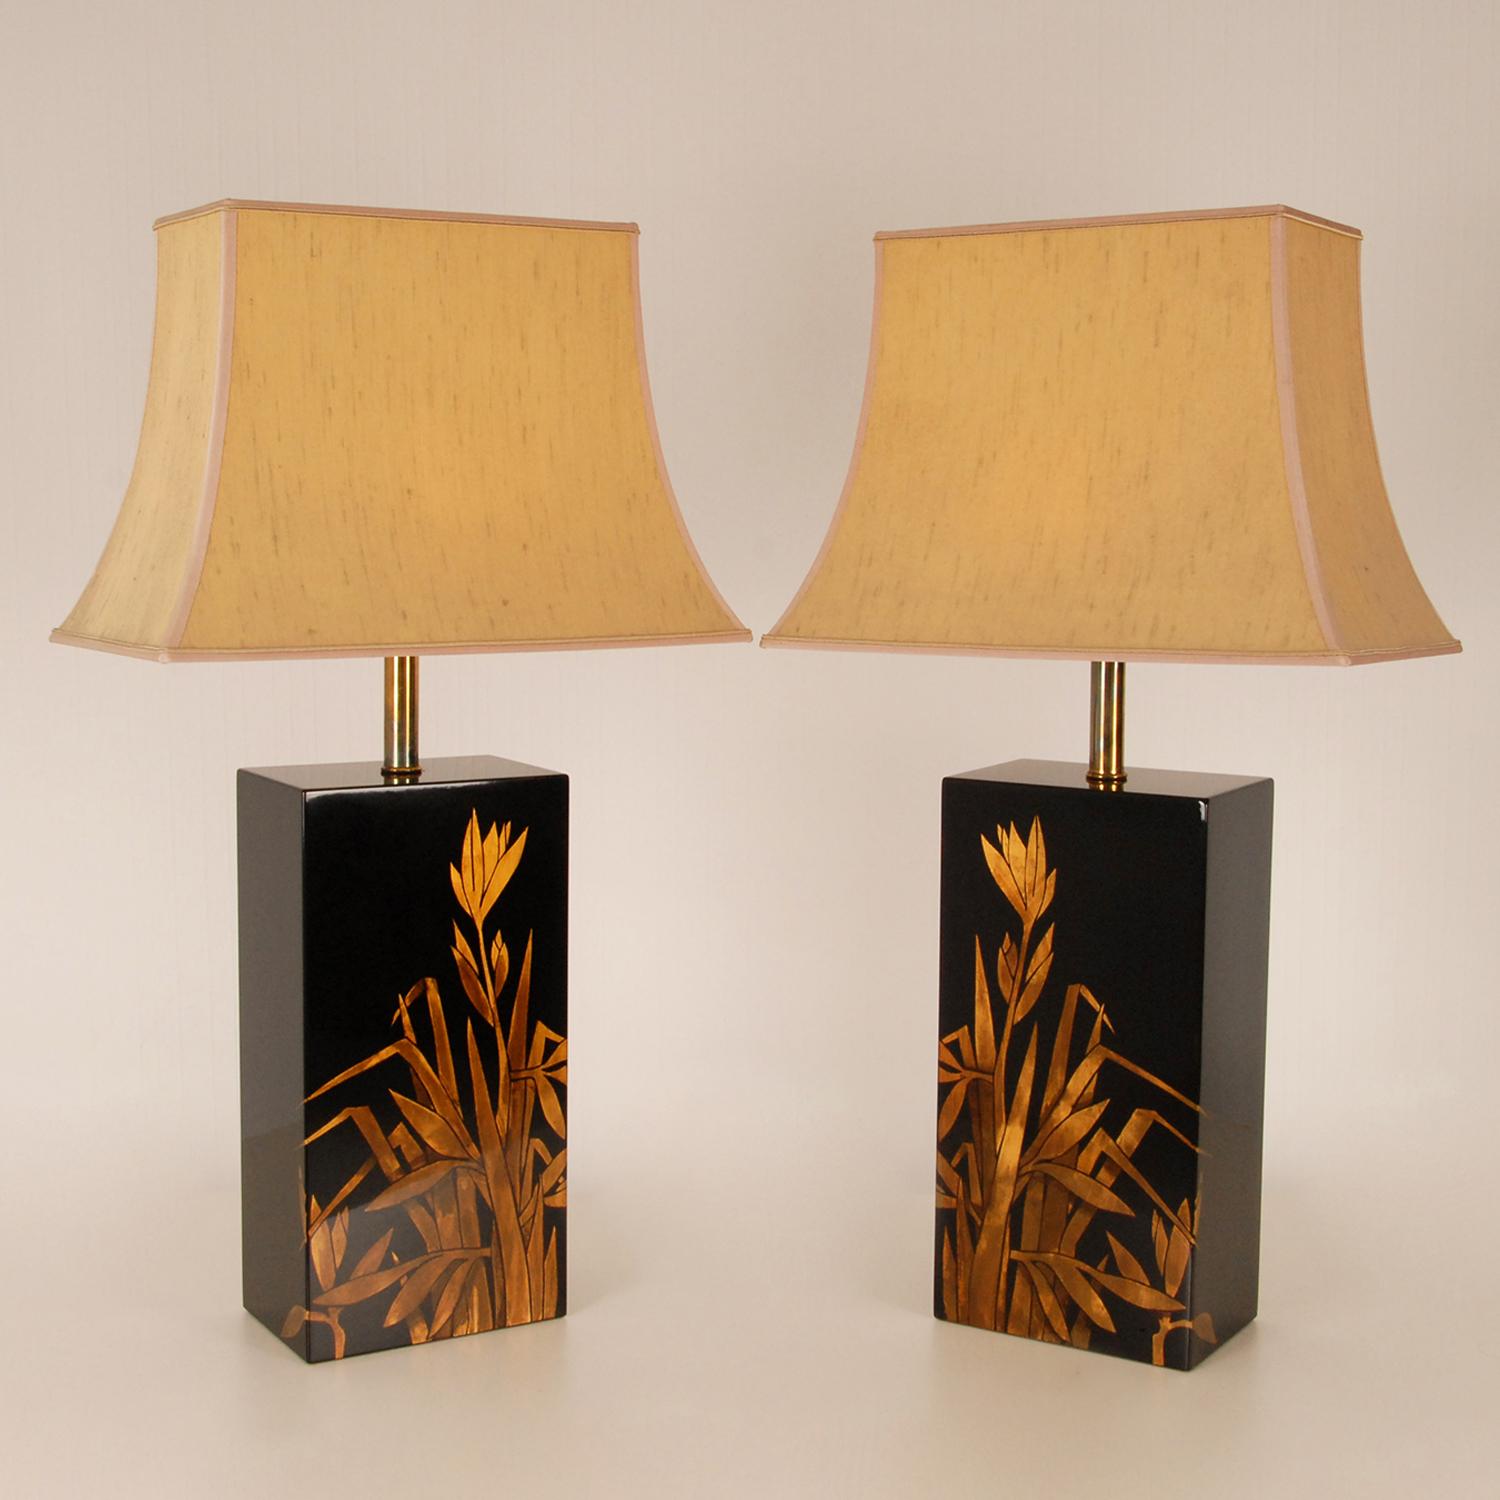 A tall pair vintage table lamps Chinoiserie Gold and Black lacquer Pagoda Lamps
Two mirorred square black lacquered body with gold floral decor
Made in the oriental style
Color Black and Gold
Origin France 1970s
Lightbulb E27
Cordcolor: